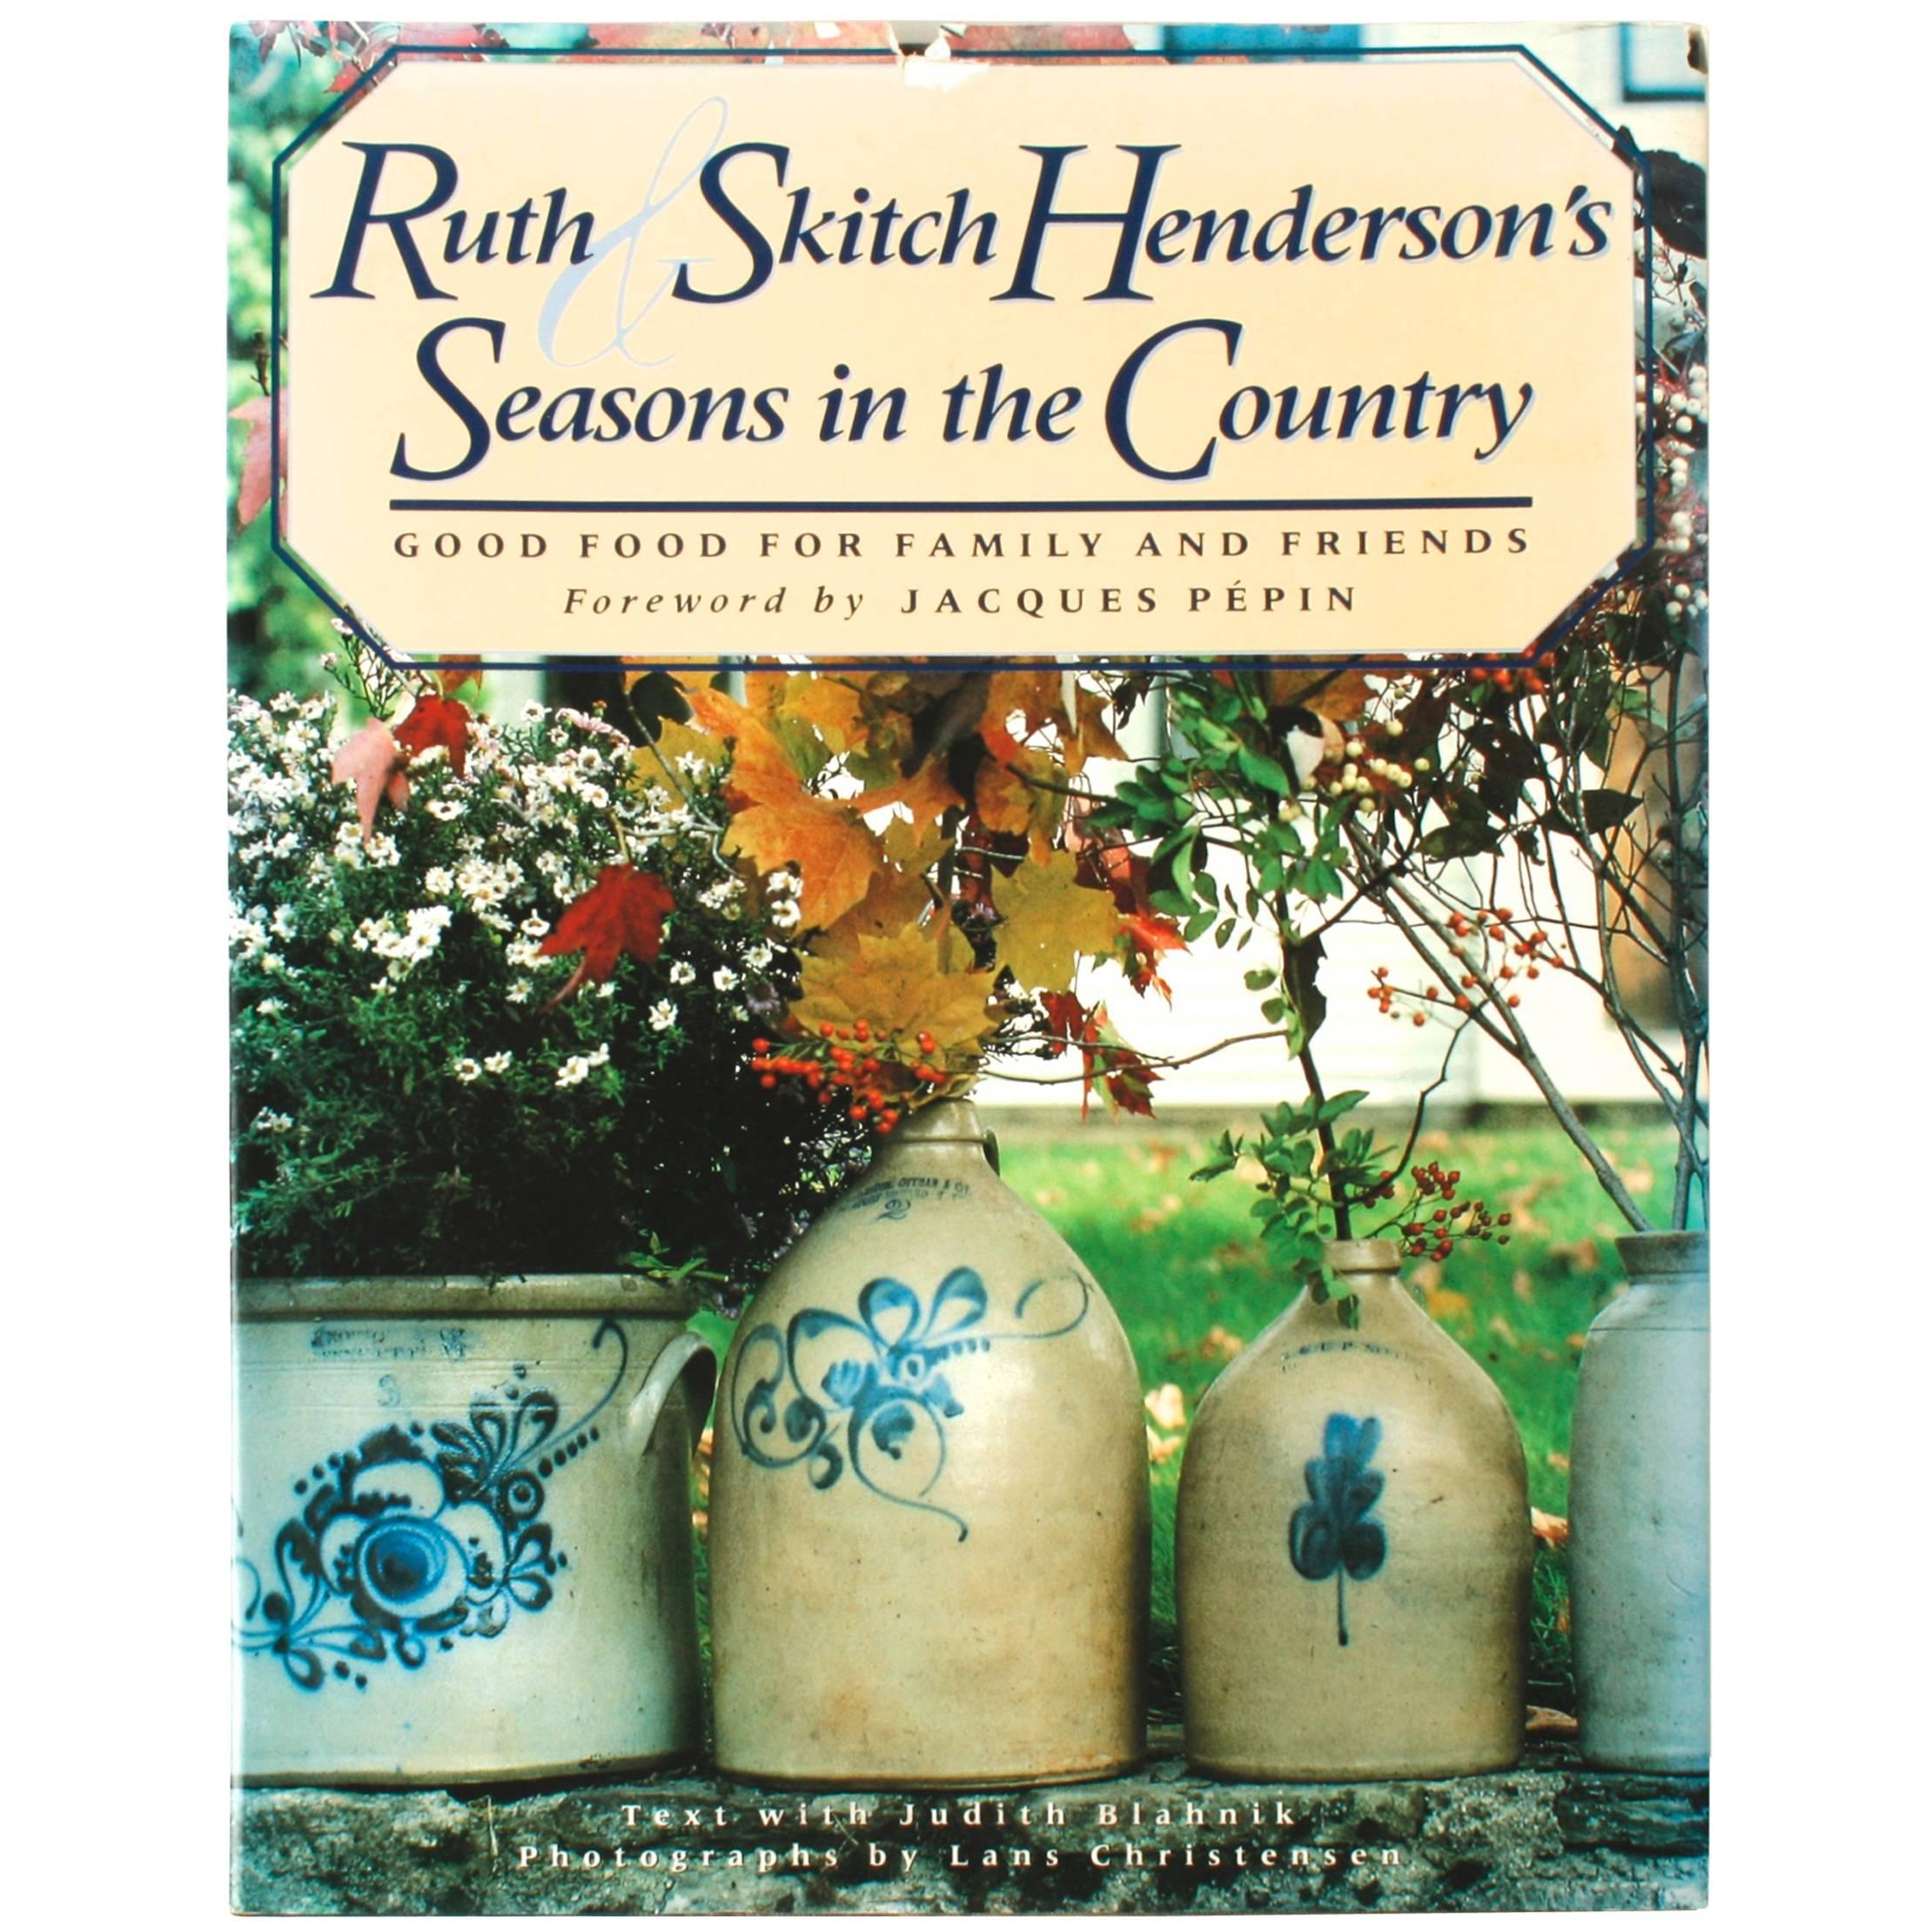 Ruth & Skitch Henderson's Seasons in the Country, première édition signée en vente